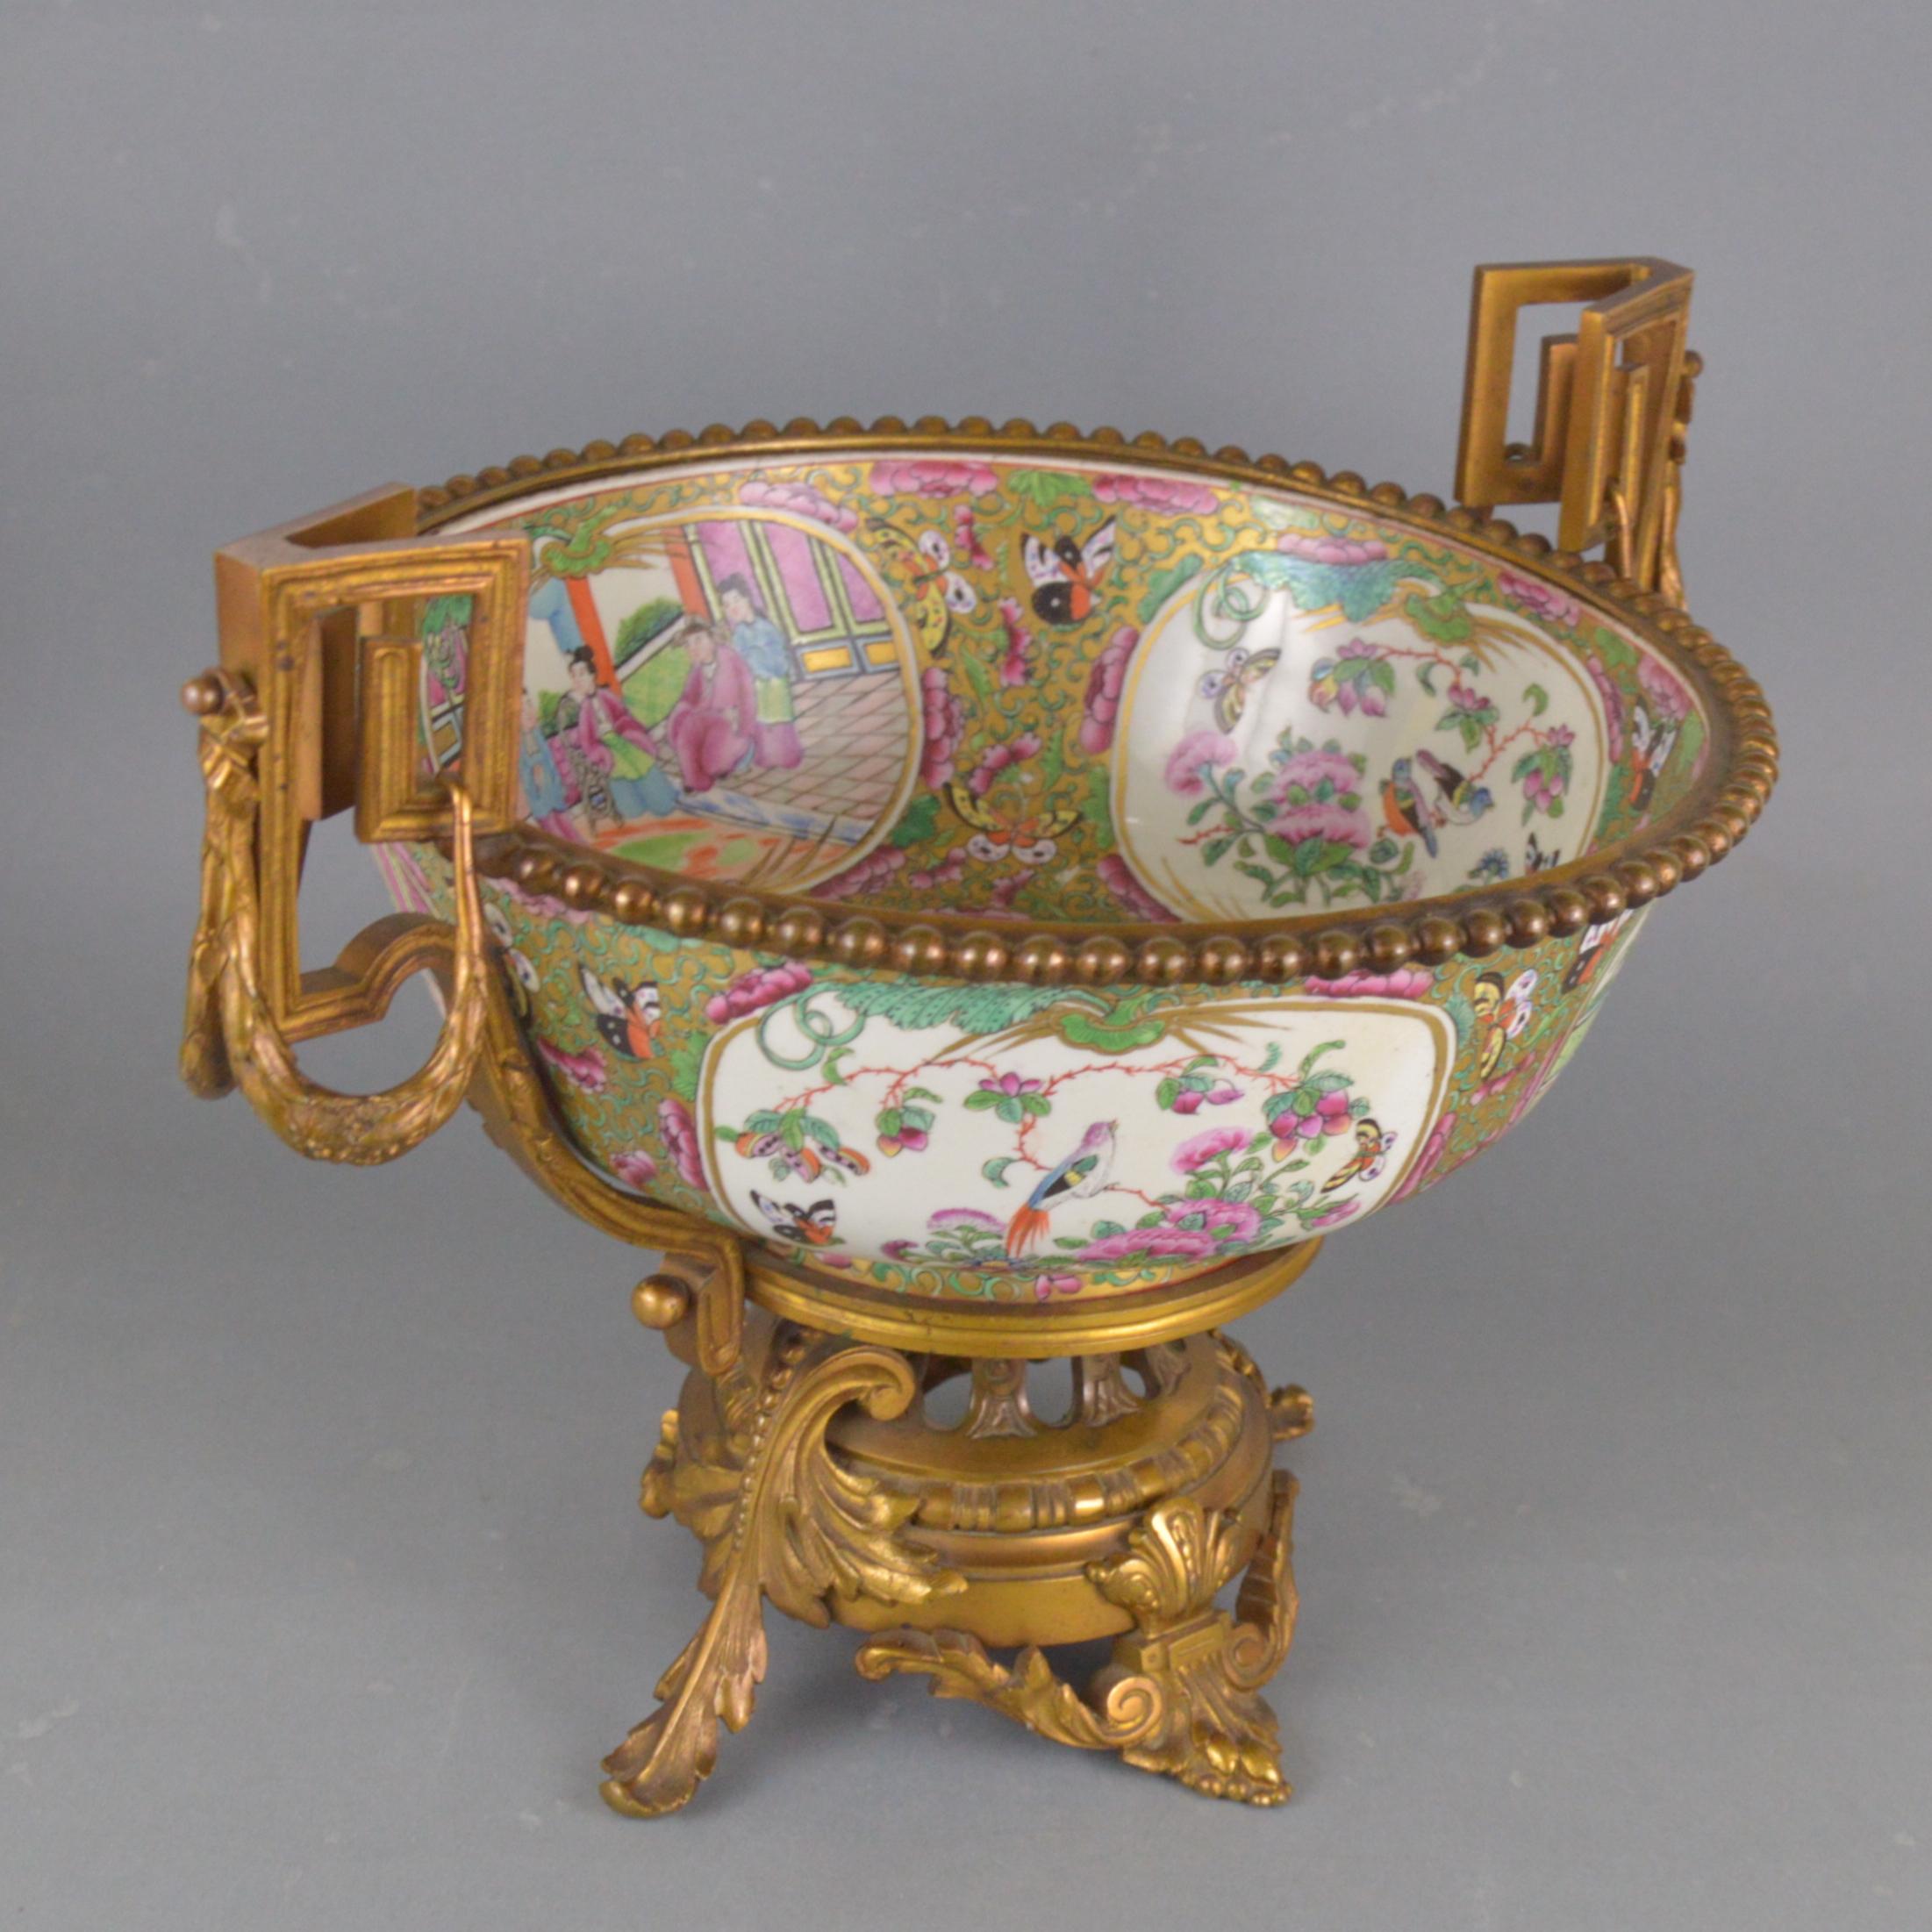 19th Century Chinese Gilt Bronze-Mounted Canton Porcelain Bowl (Emailliert)